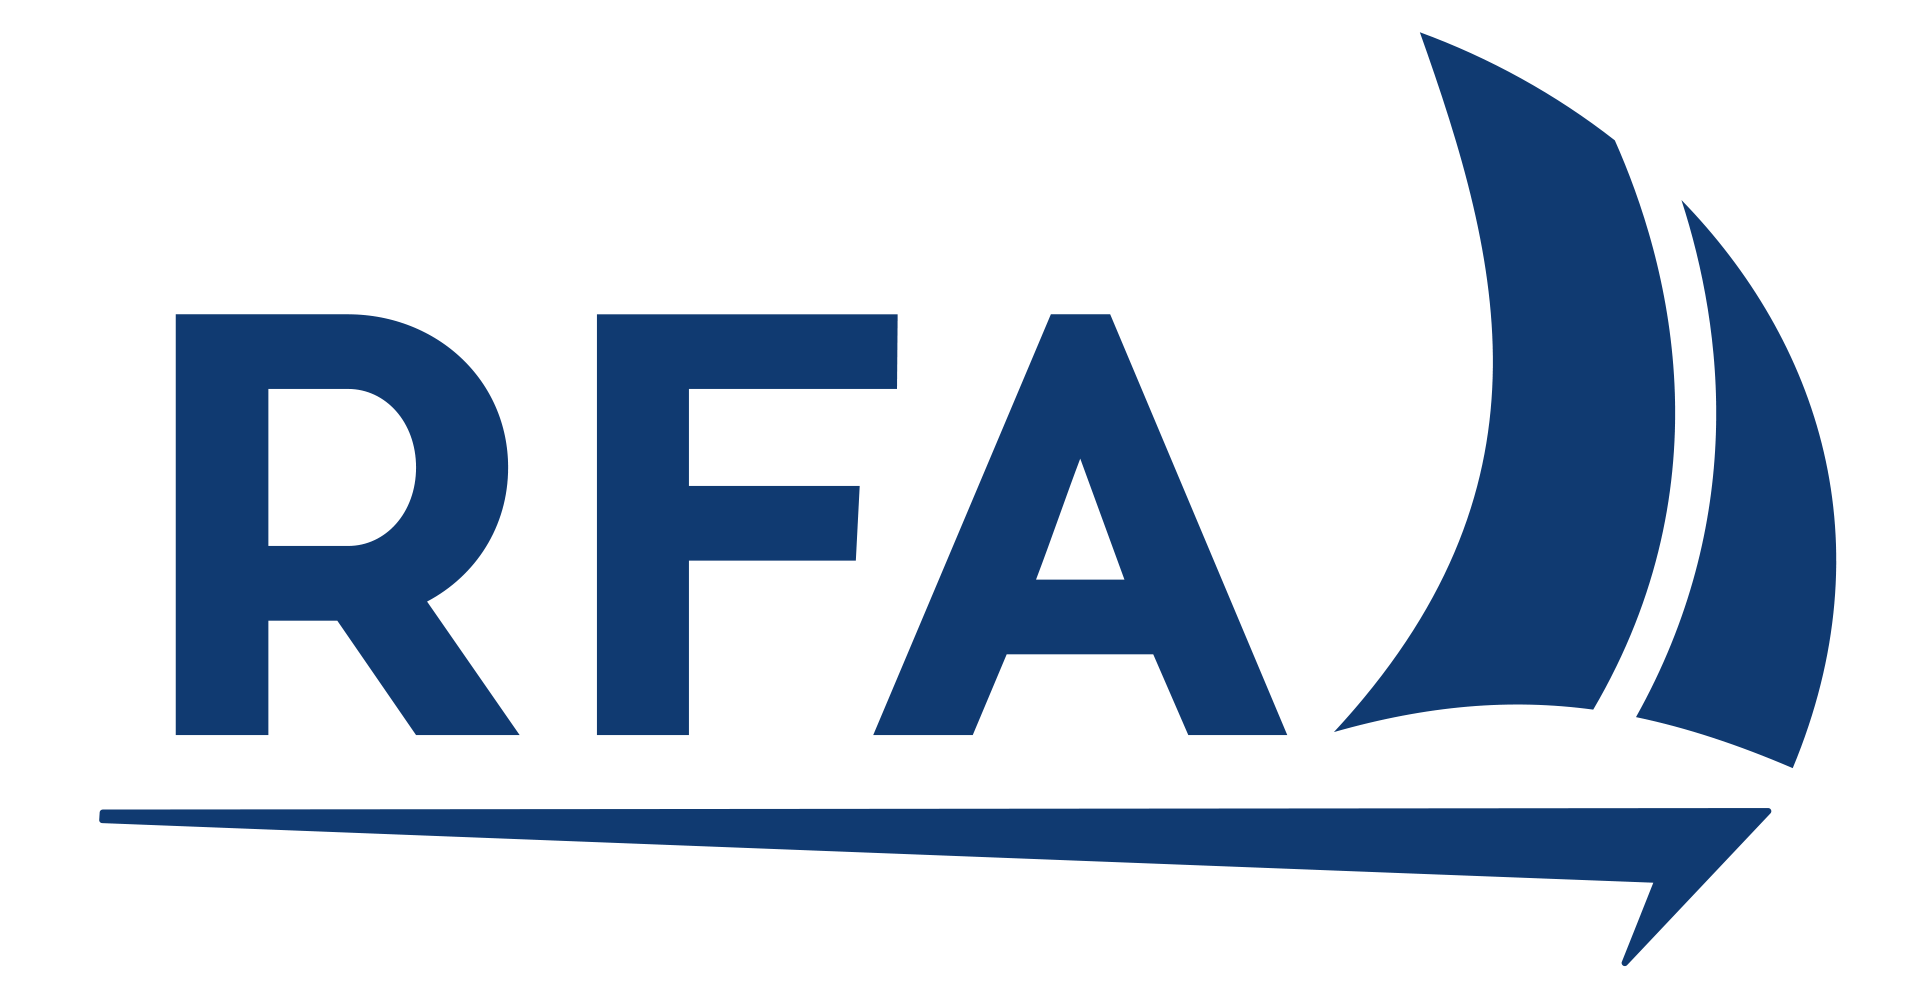 Growth clipart future growth. Rfa accelerates with expansion